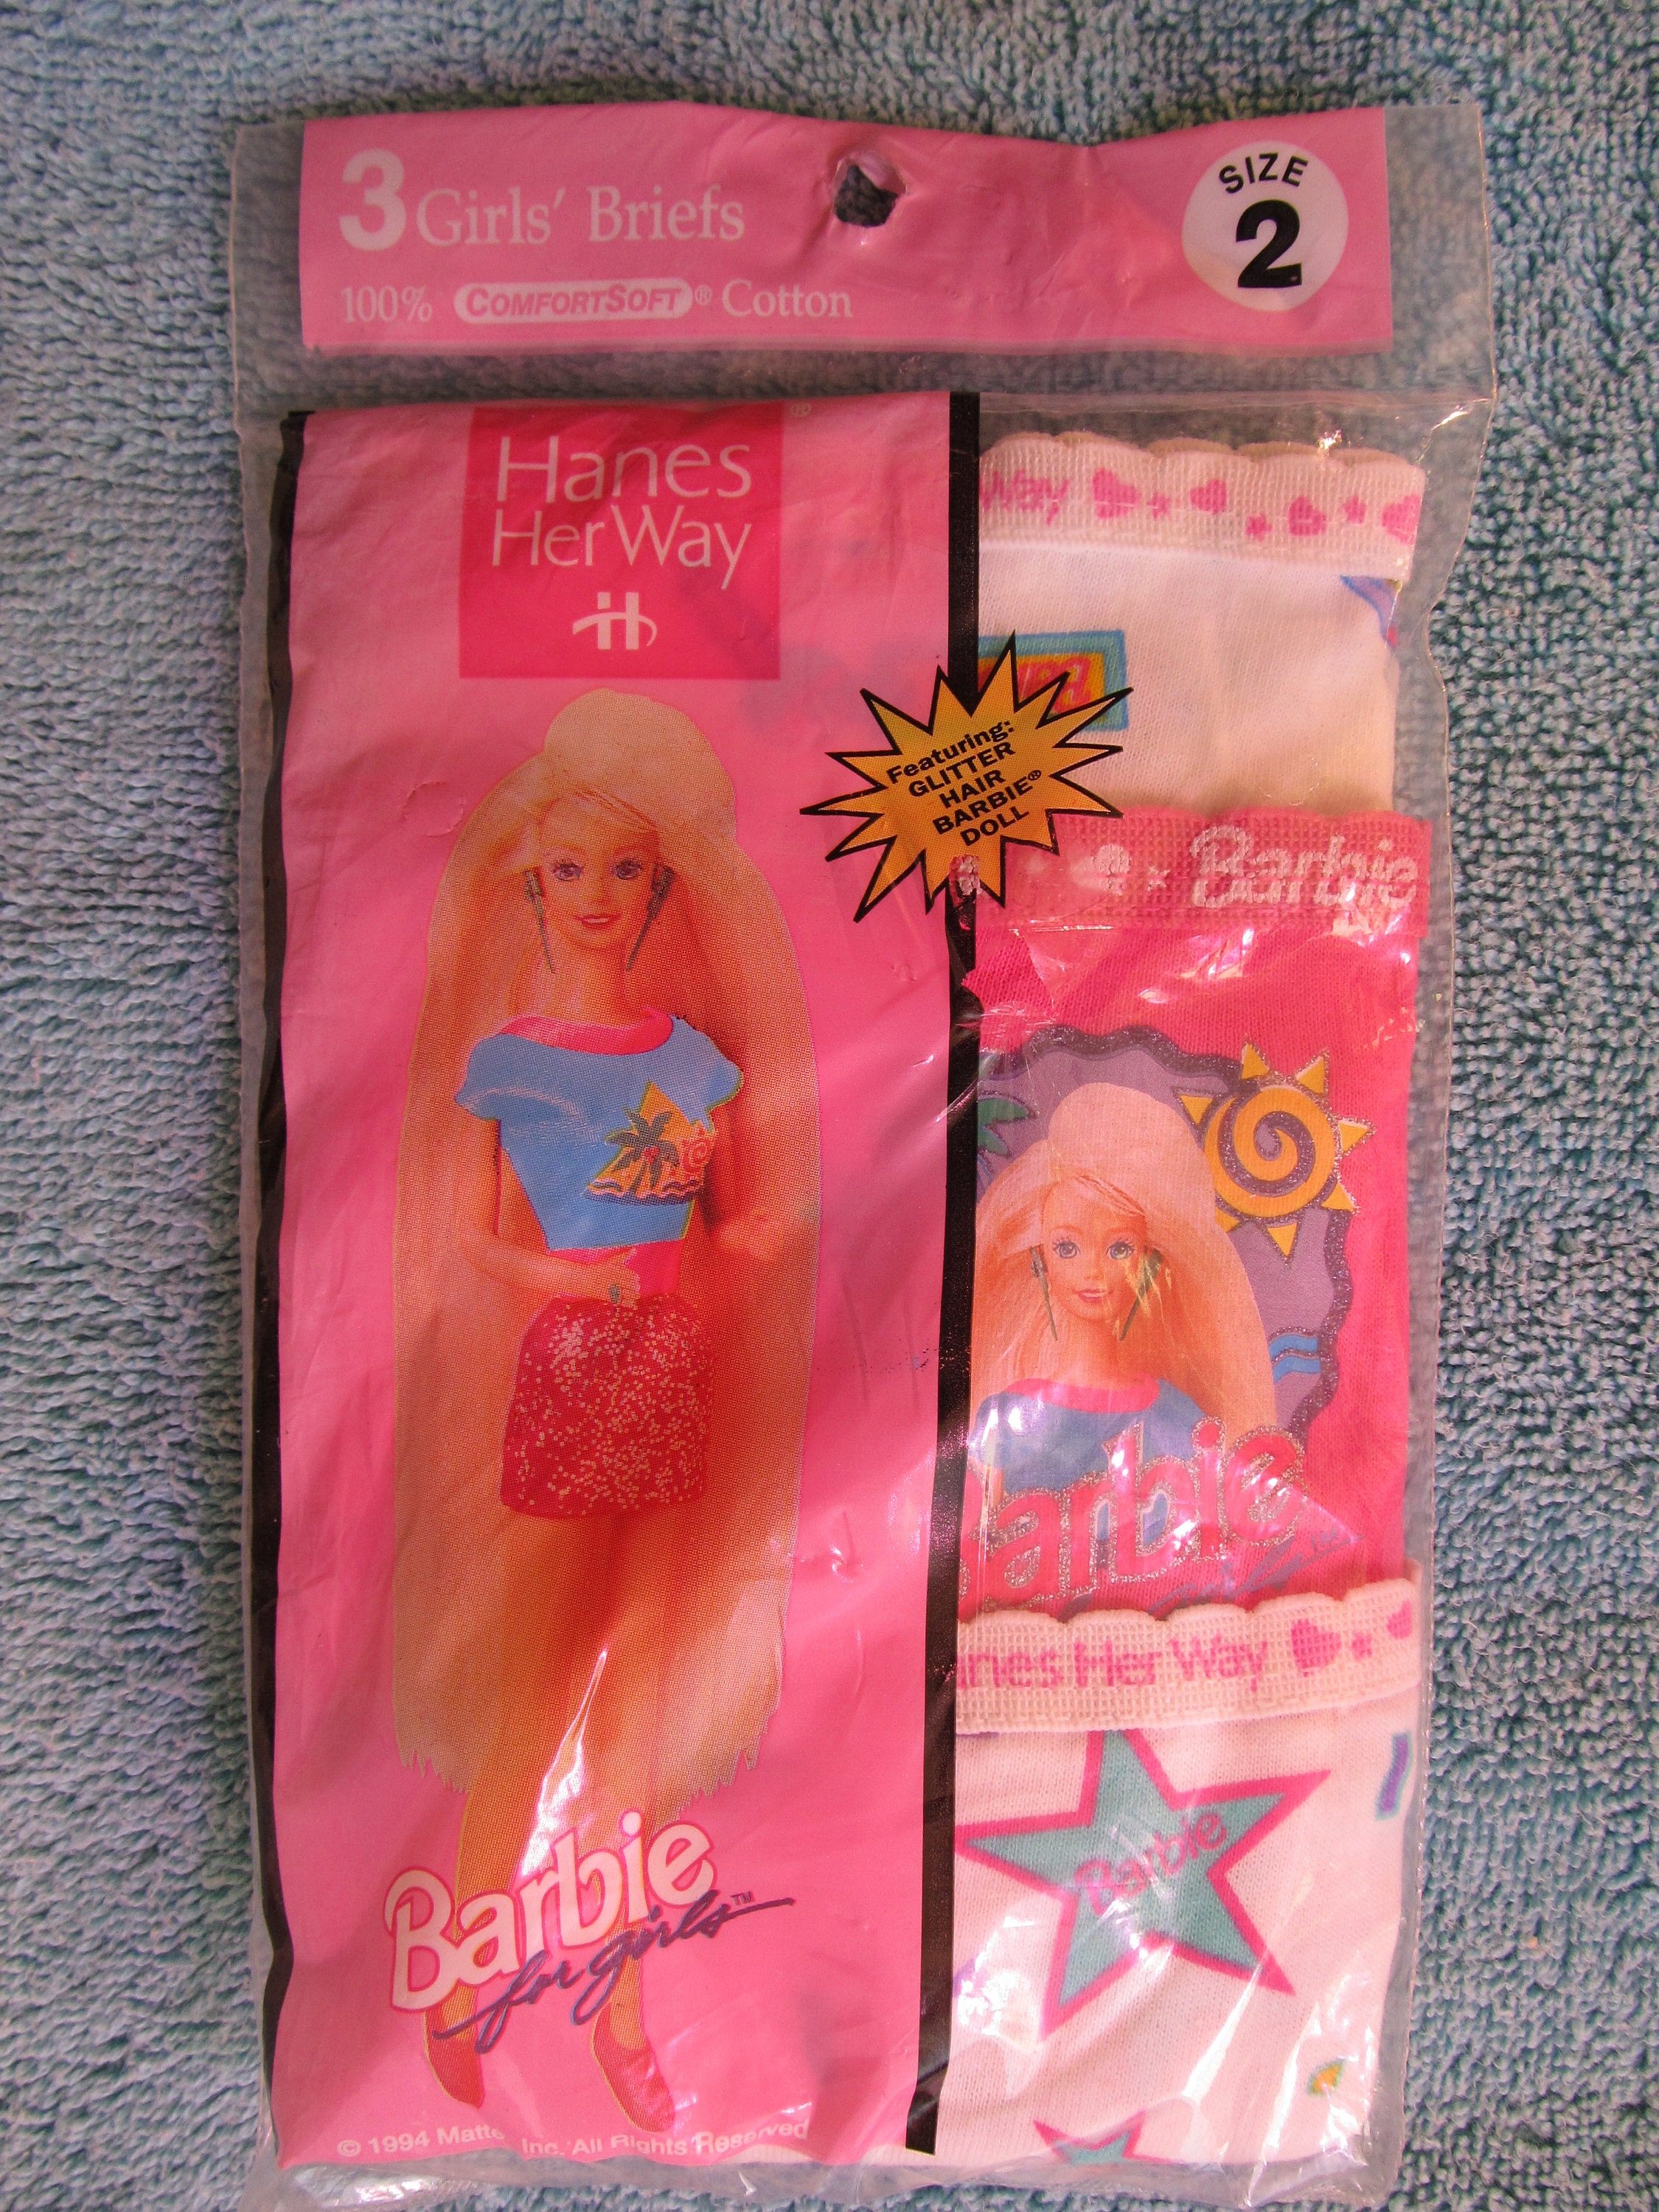 Hanes Her Way Barbie for Girls Briefs Size 2 New in Package of 3 Featuring  Glitter Hair Barbie Doll 